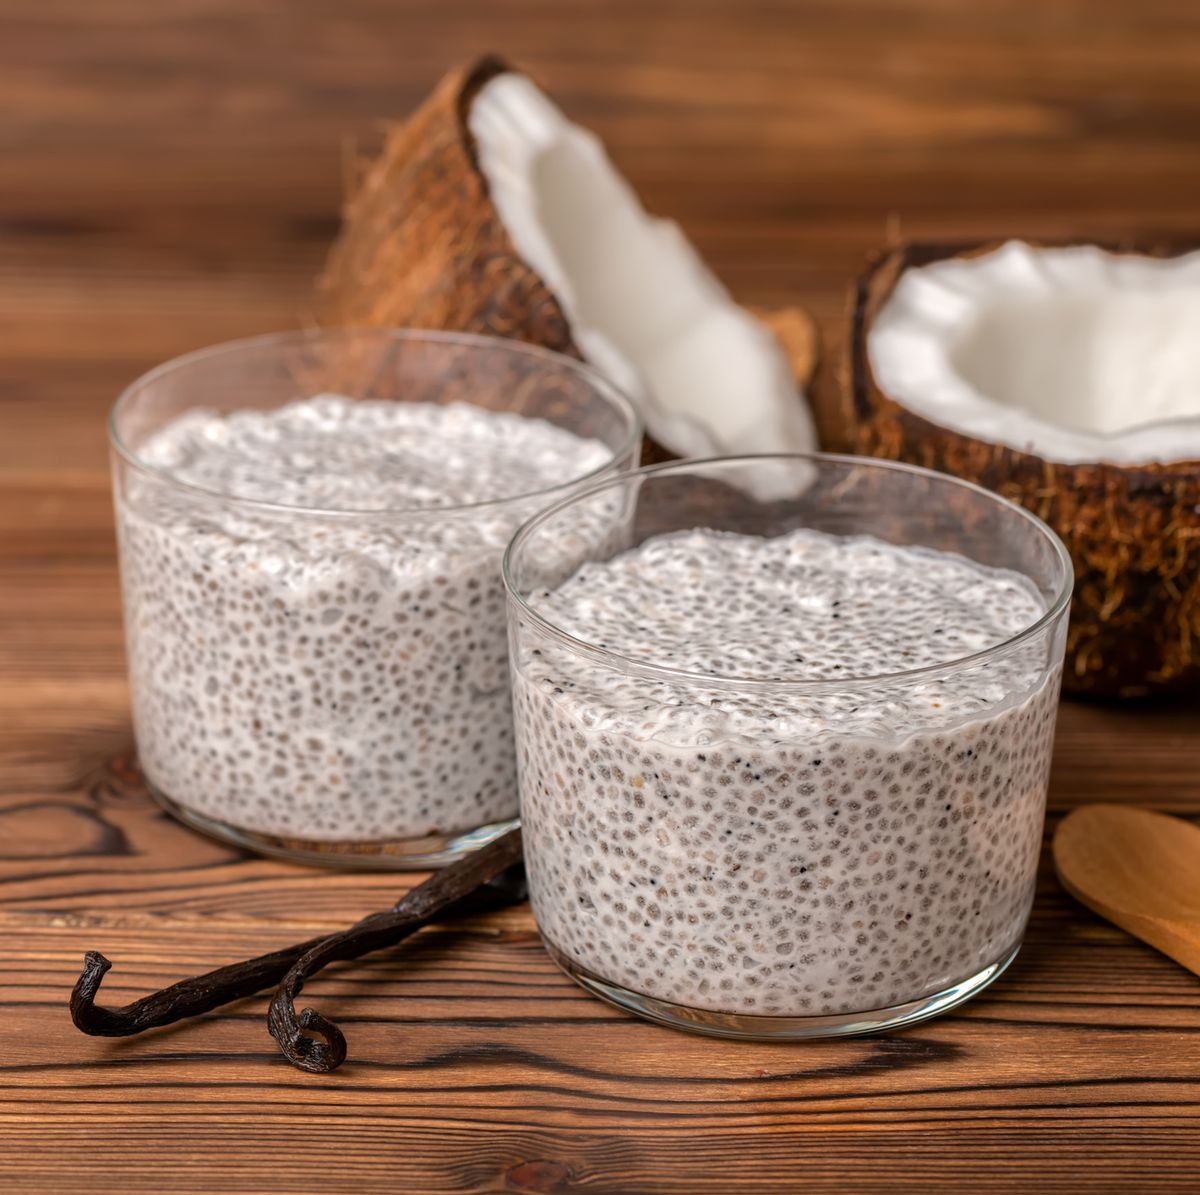 chia pudding in glass, decorated  vanilla pods, spoon and coconuts on wooden background, diet healthy eating and weight loss concept